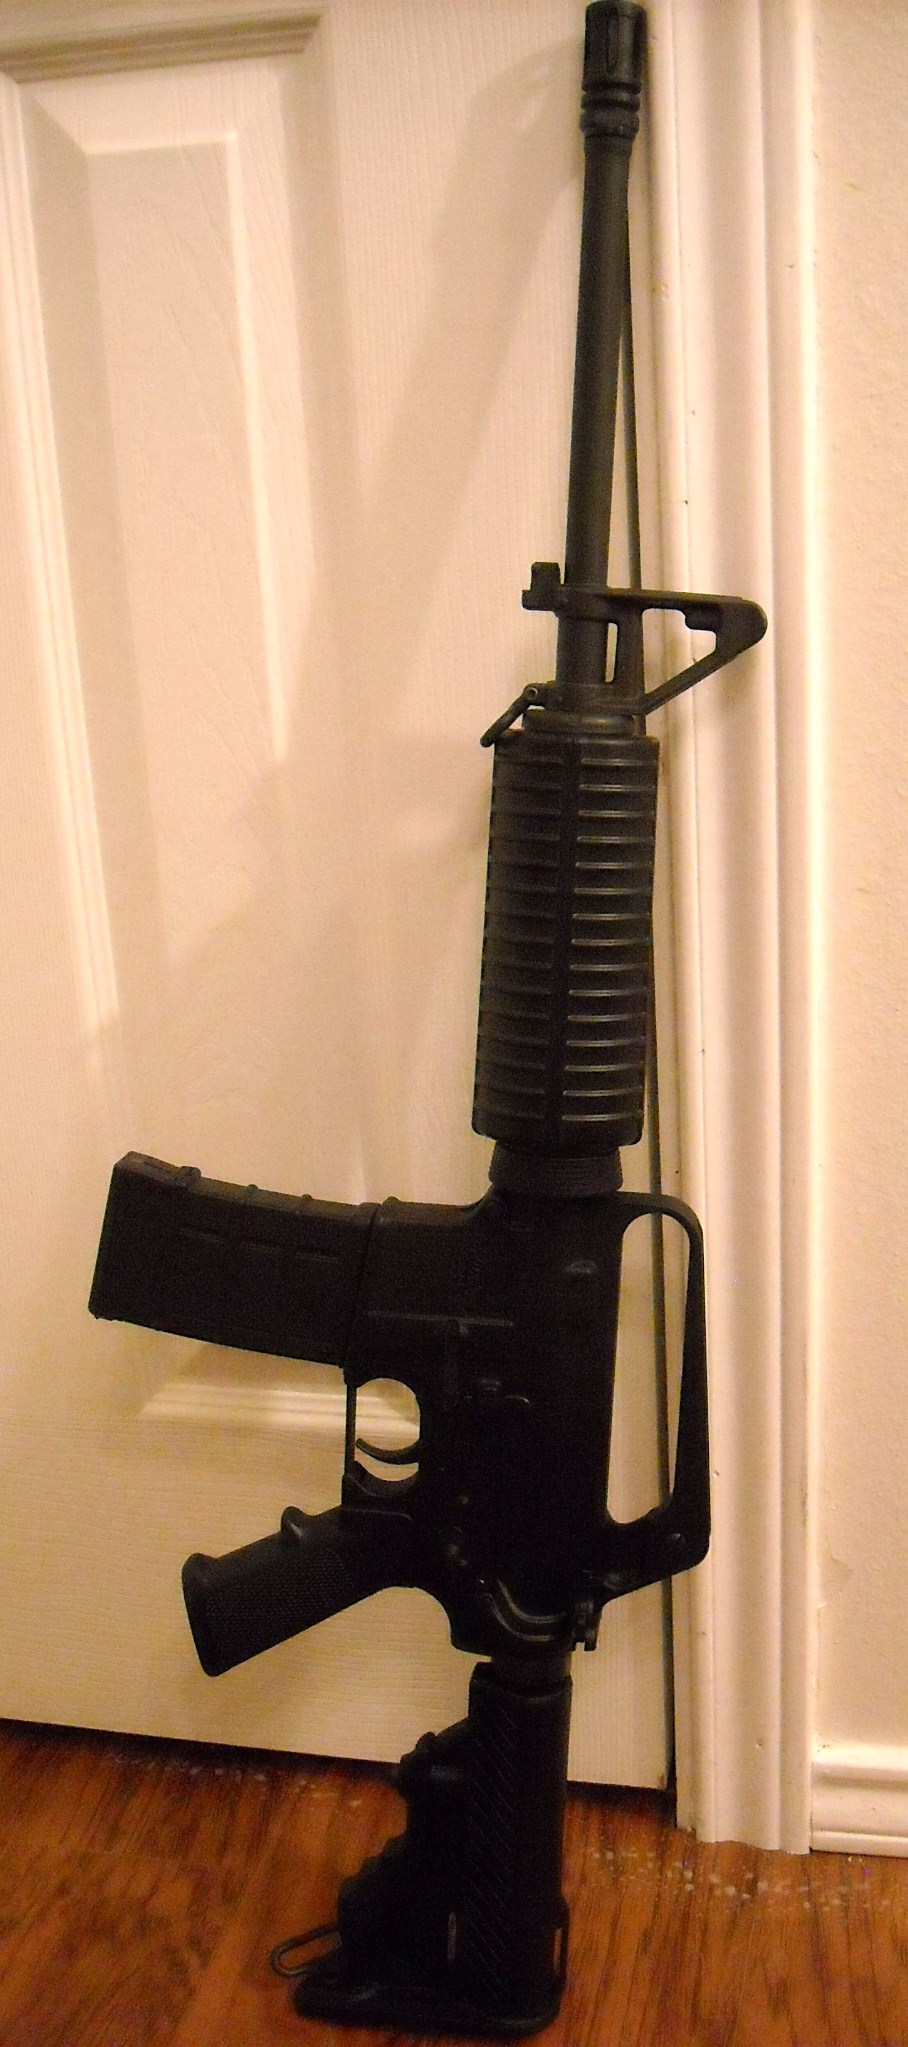 This is an image of the AR15 Personal Defense Weapon - Home Defense Weapon